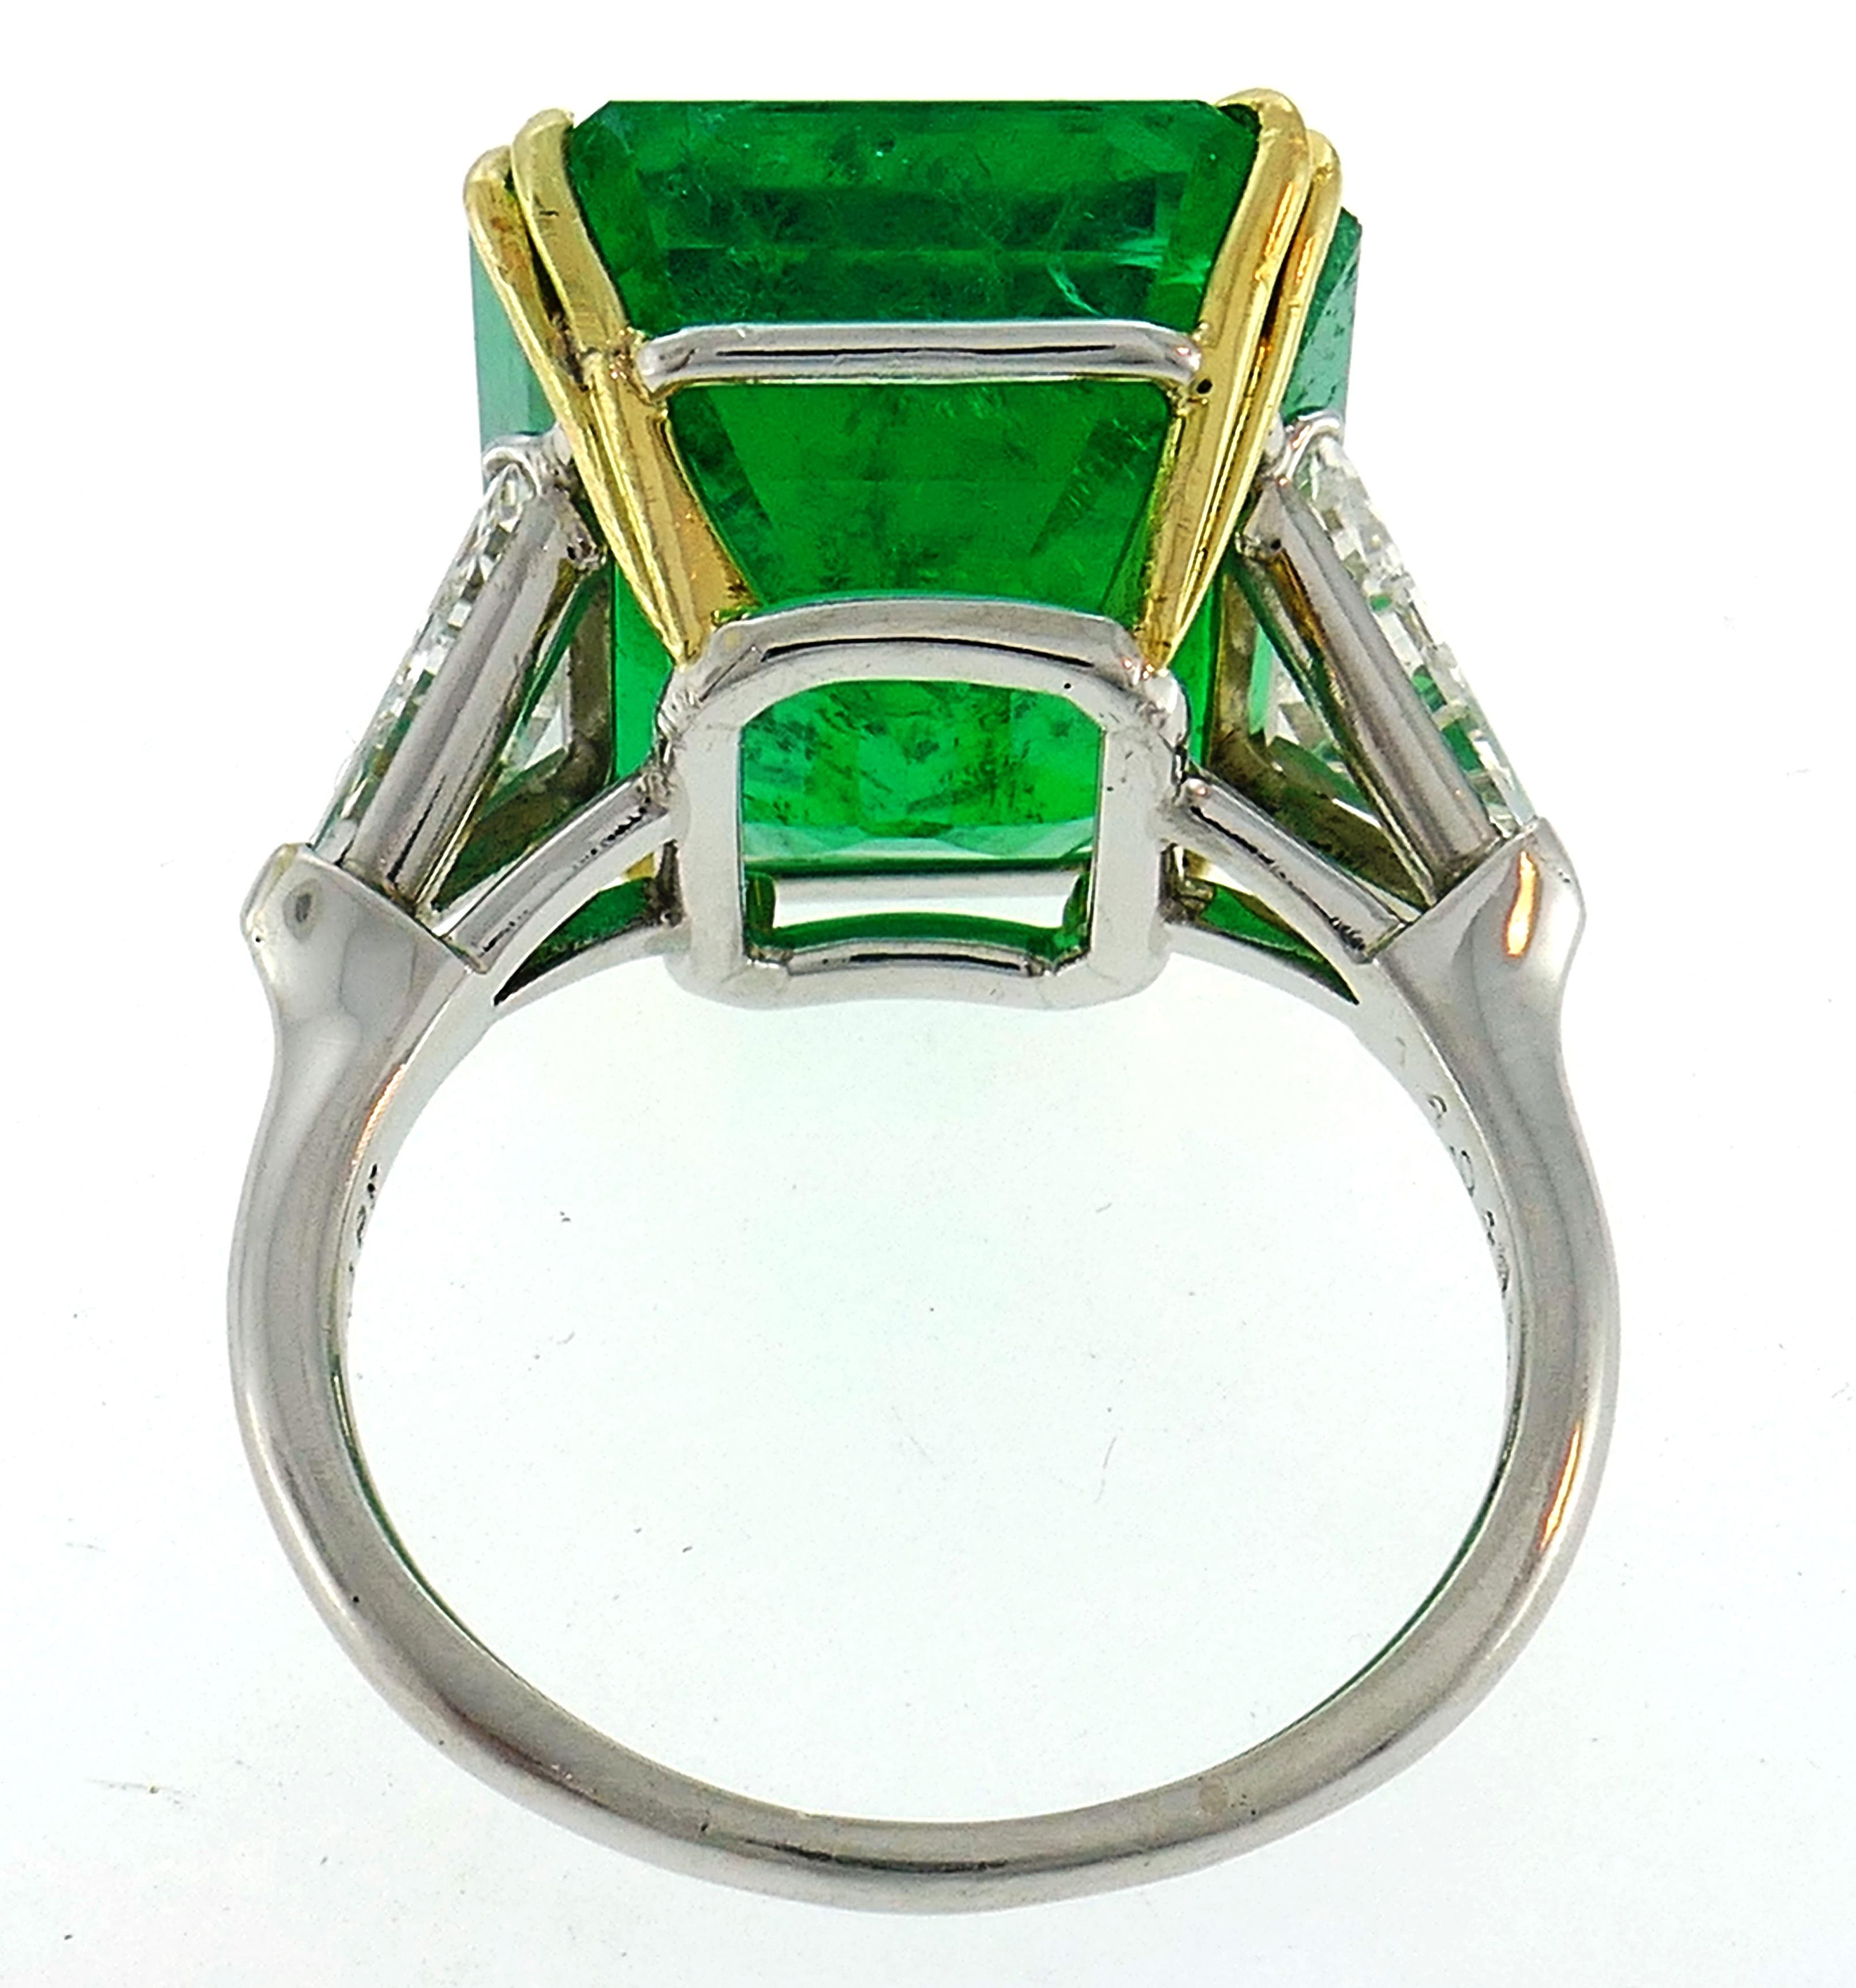 Vintage Harry Winston Emerald Diamond Platinum Ring 14.04 Carat Colombian AGL In Good Condition For Sale In Beverly Hills, CA